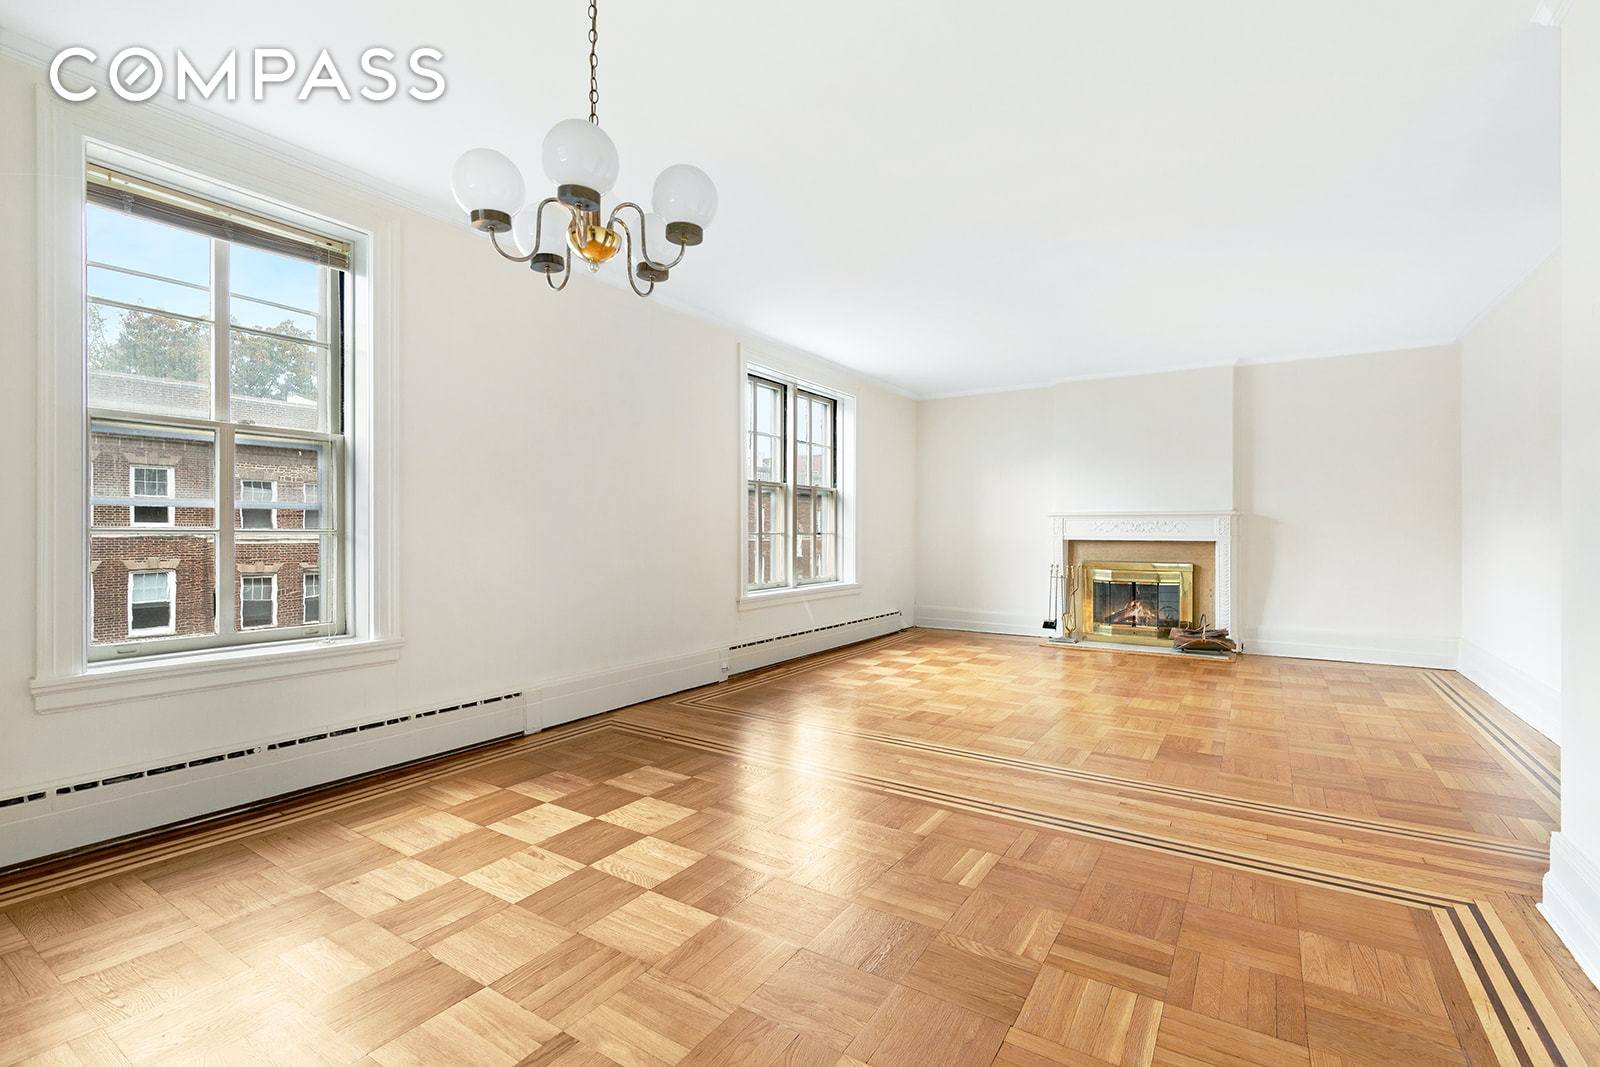 Live a life more extraordinary in this spacious pre war 3 bedroom 2 bathroom home with a wood burning fireplace in The Chateau, one of Jackson Heights' most fabled cooperatives.